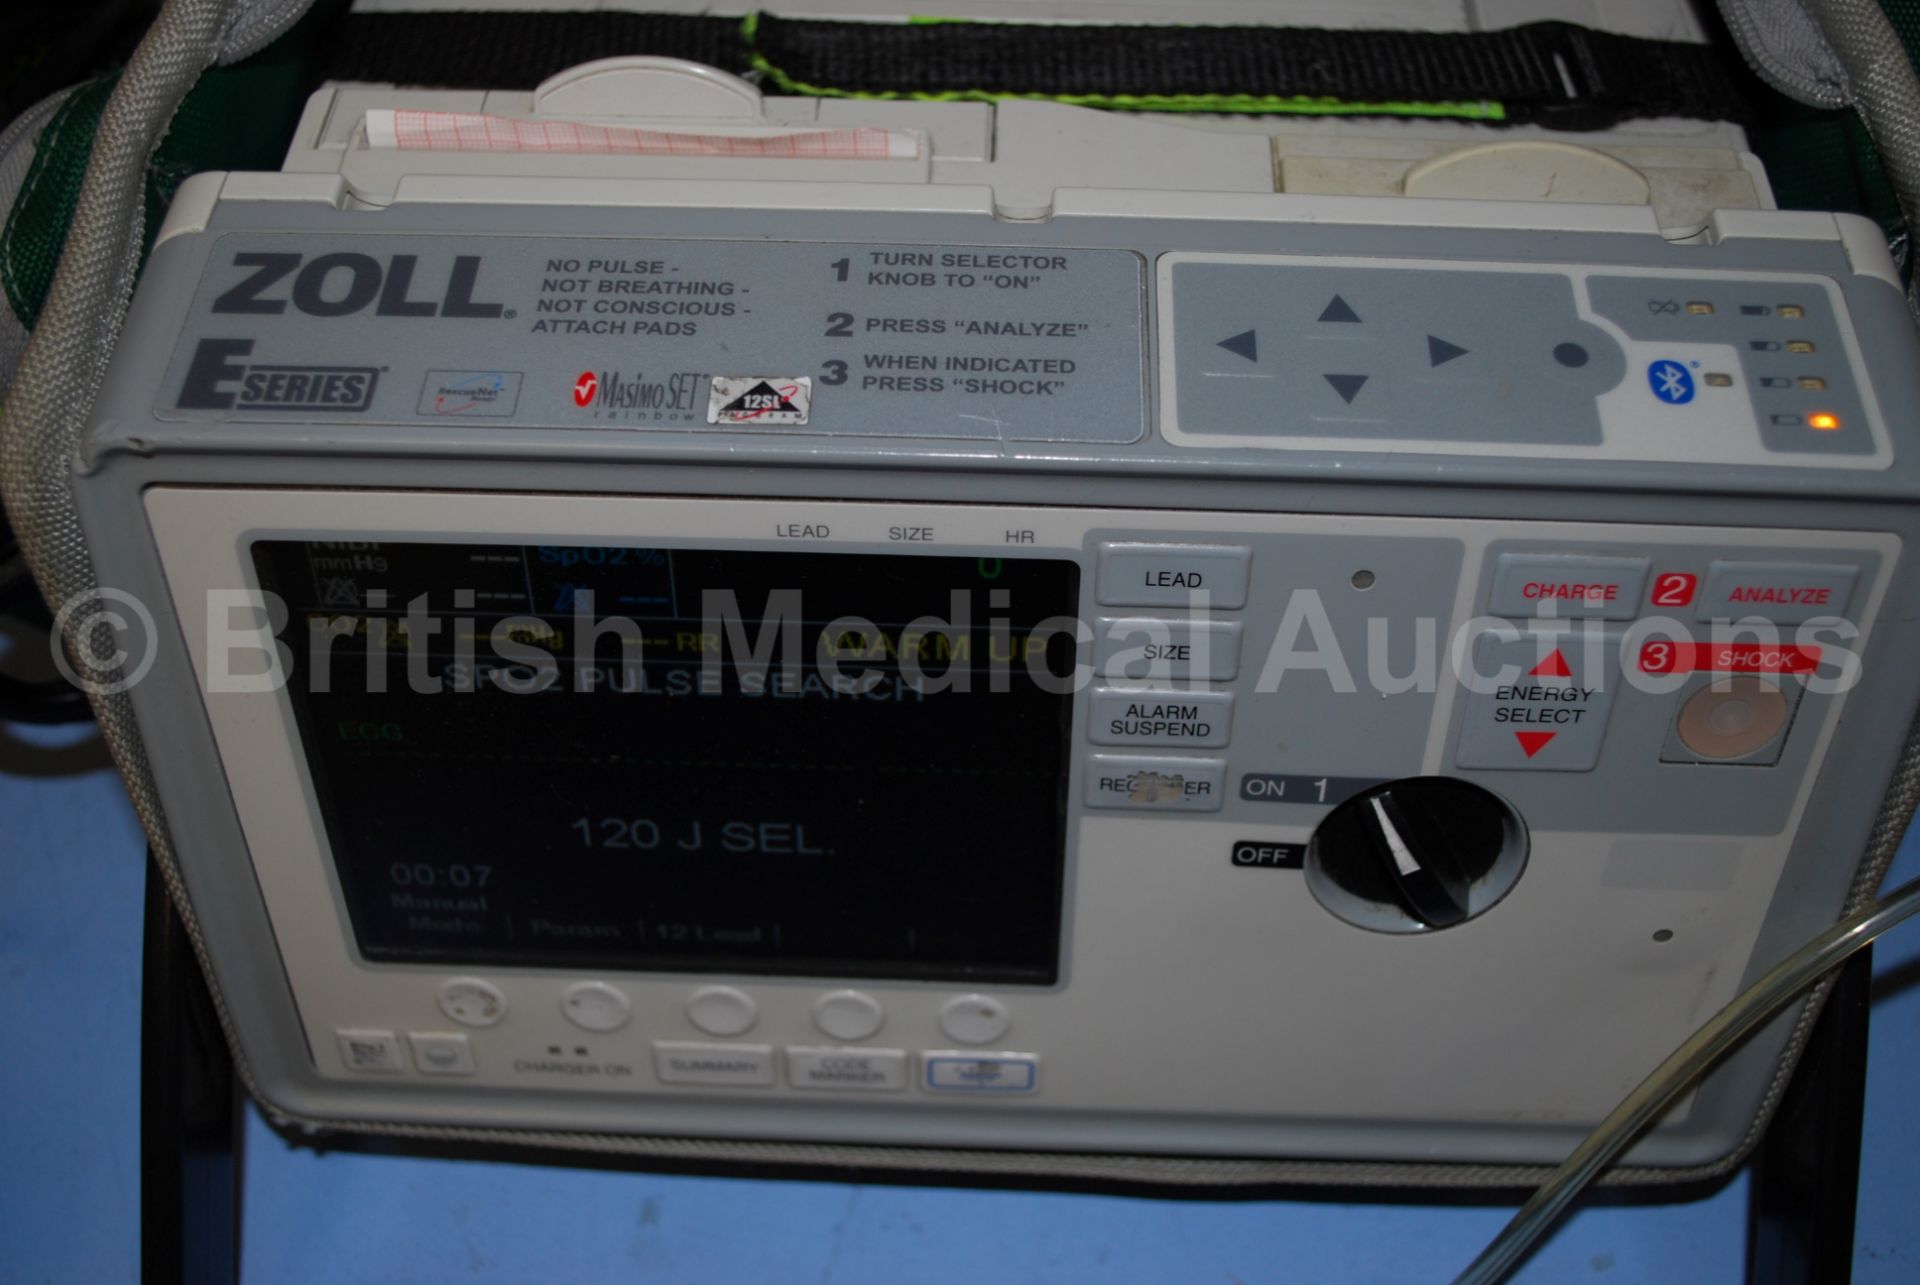 Zoll E Series Defibrillator with Bluetooth, ECG, S - Image 4 of 5